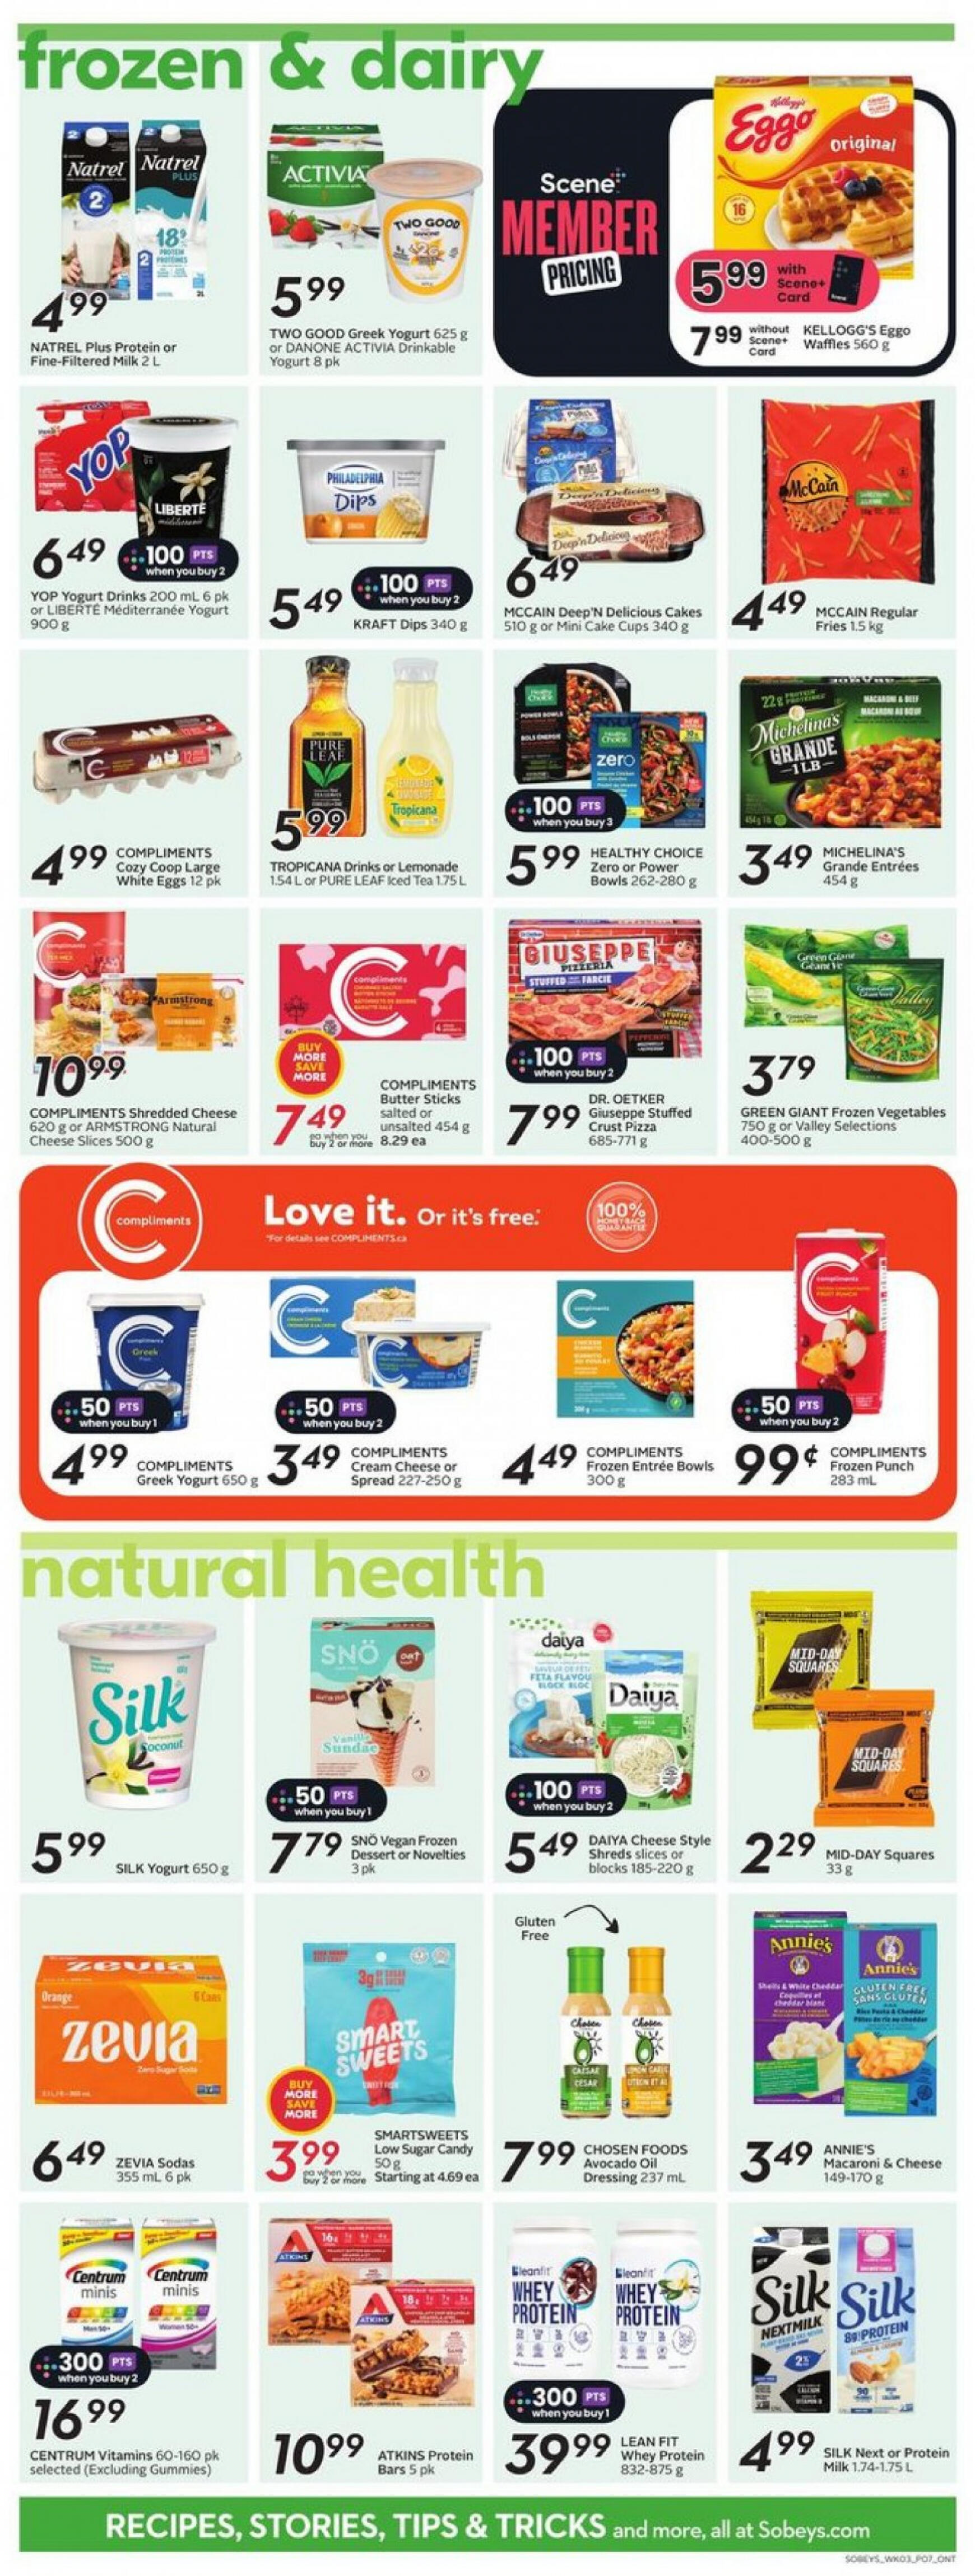 sobeys - Sobeys - Weekly Flyer - Ontario flyer current 16.05. - 22.05. - page: 13